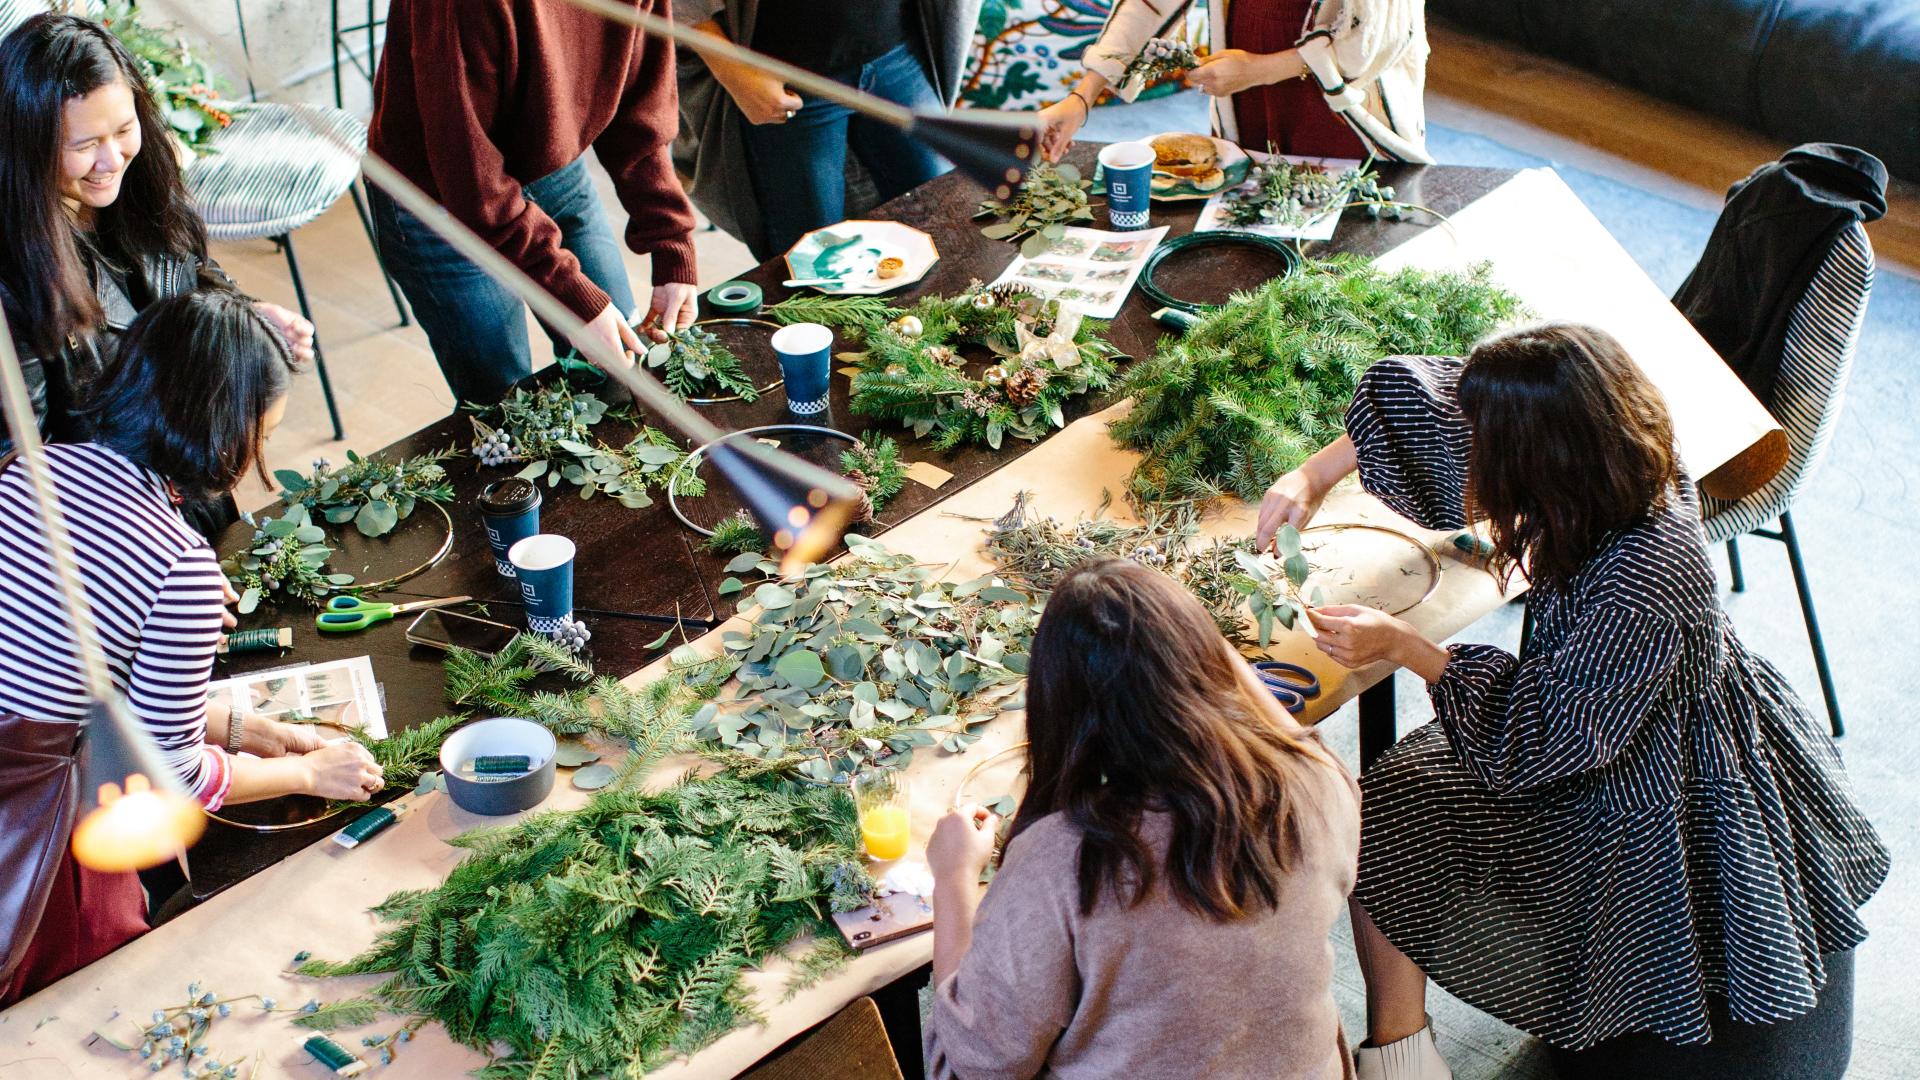 A group of people around a table, working with green vegetation